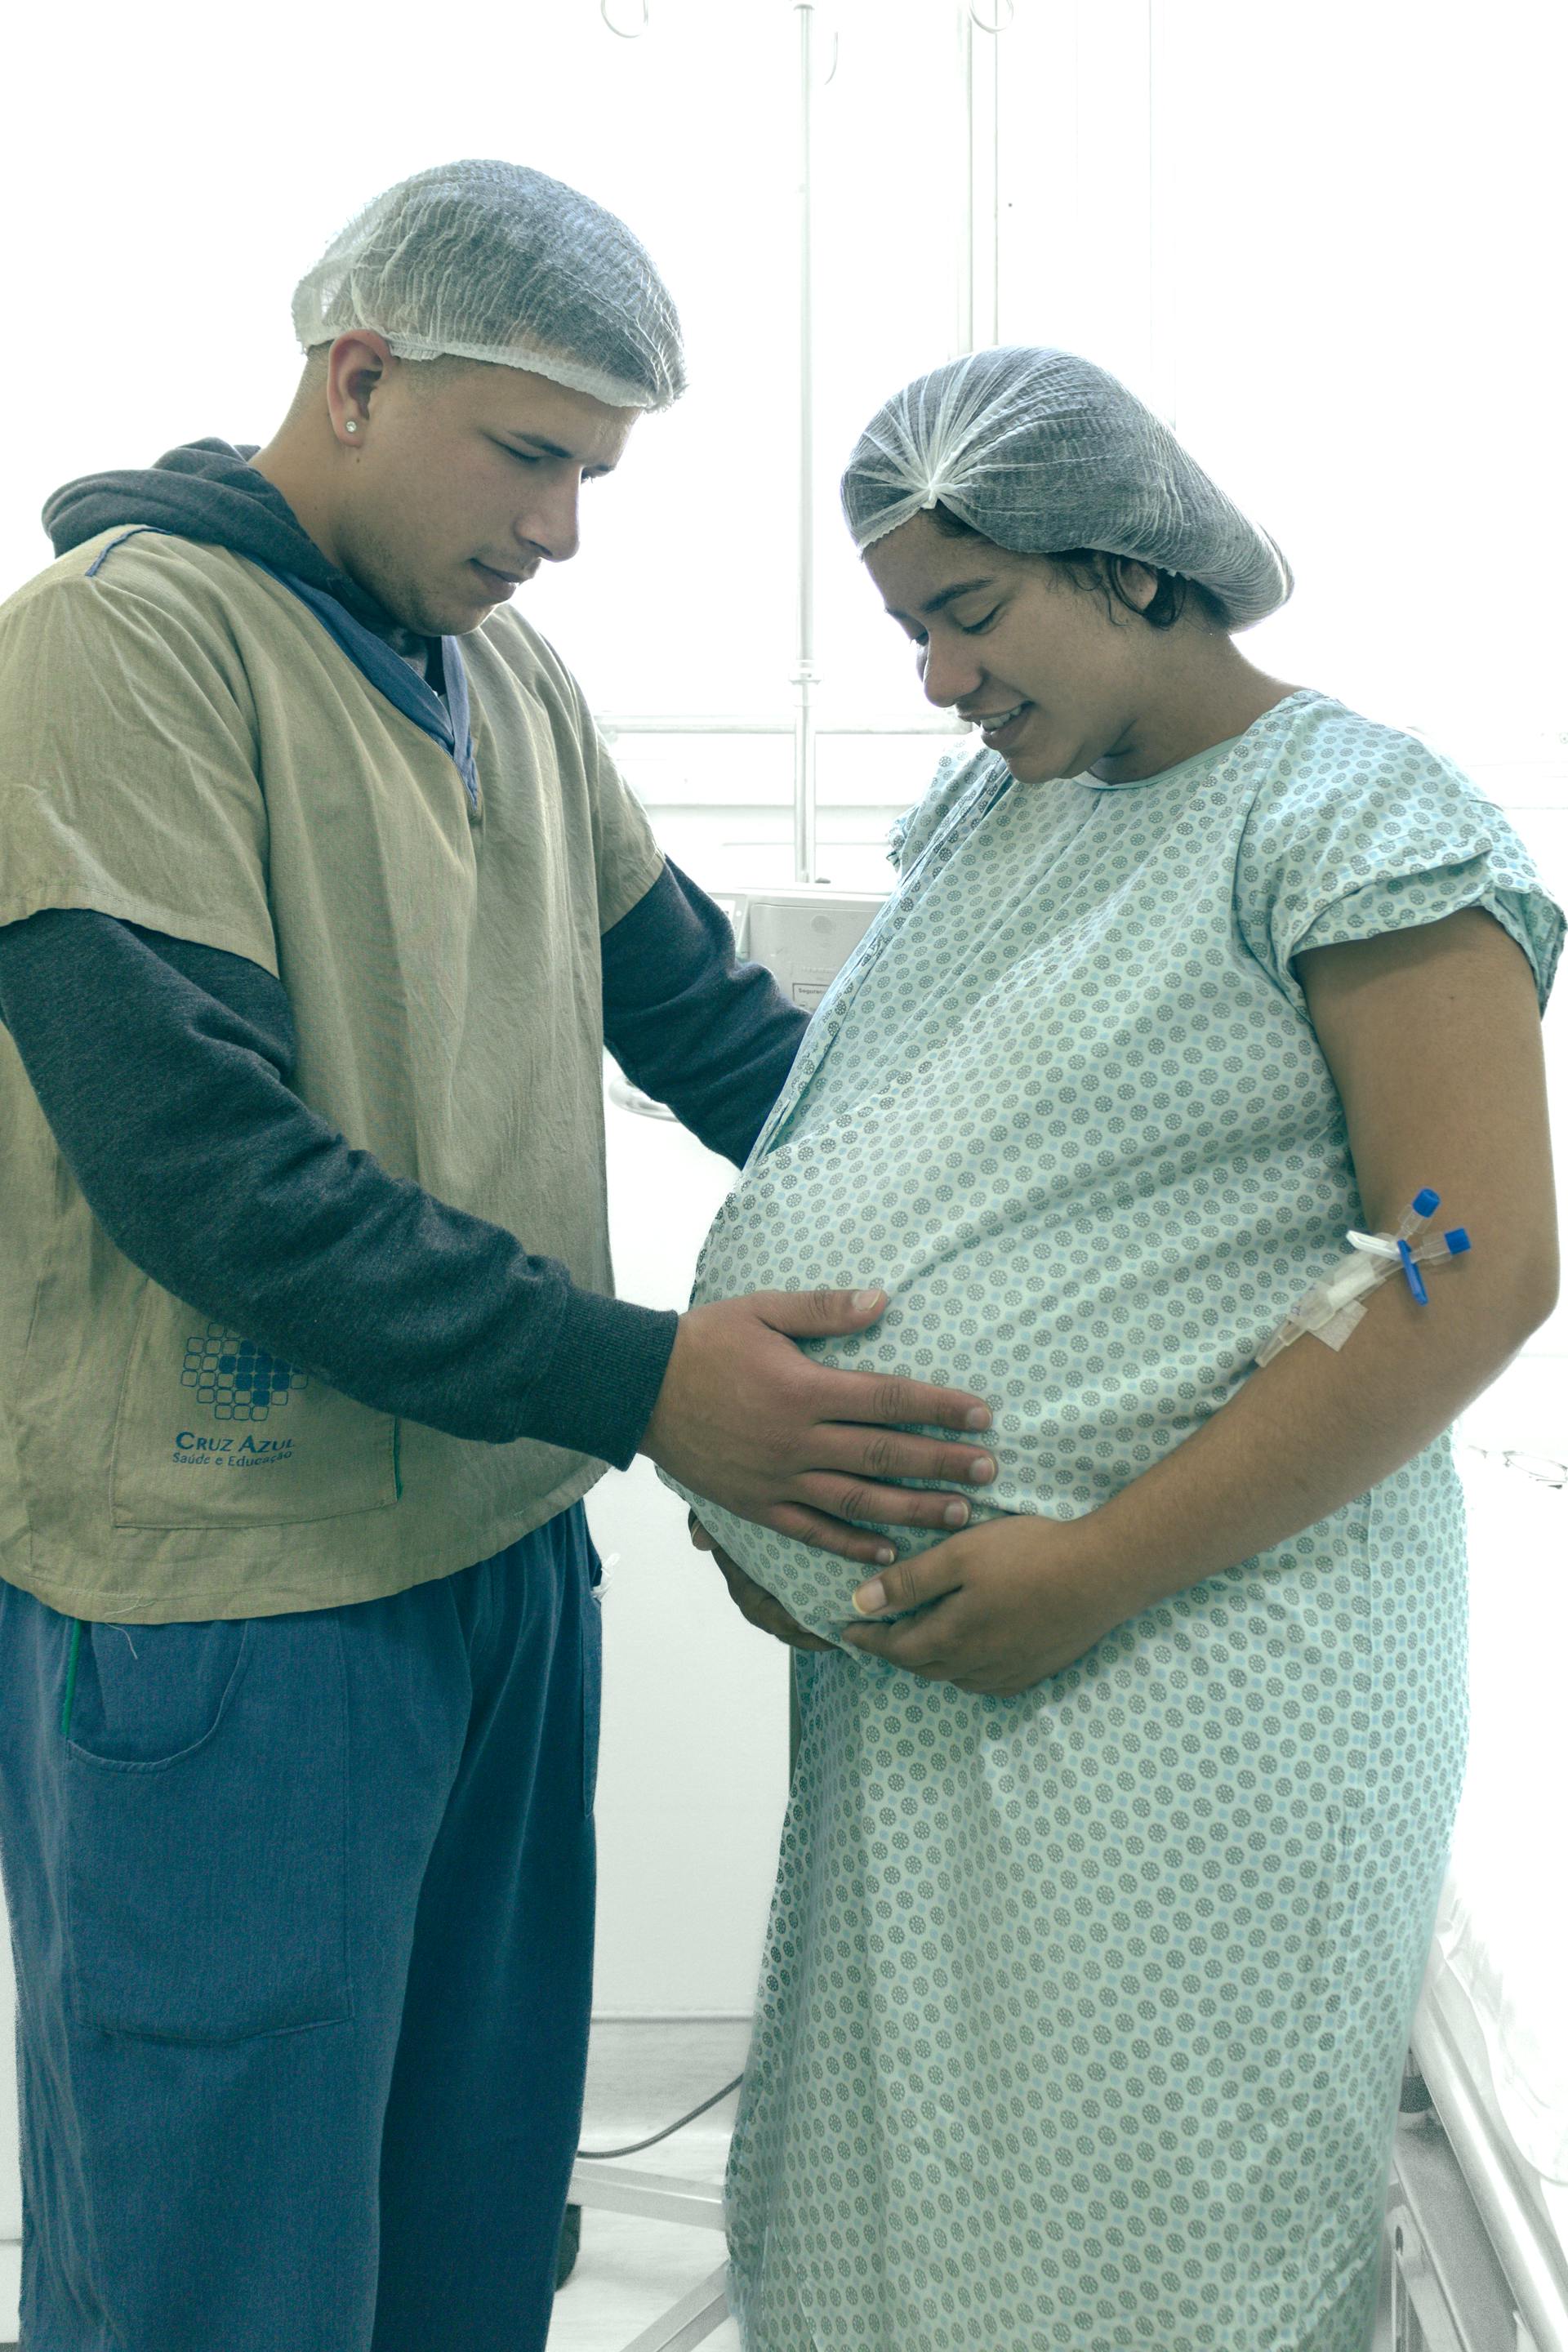 A pregnant woman in hospital | Source: Pexels